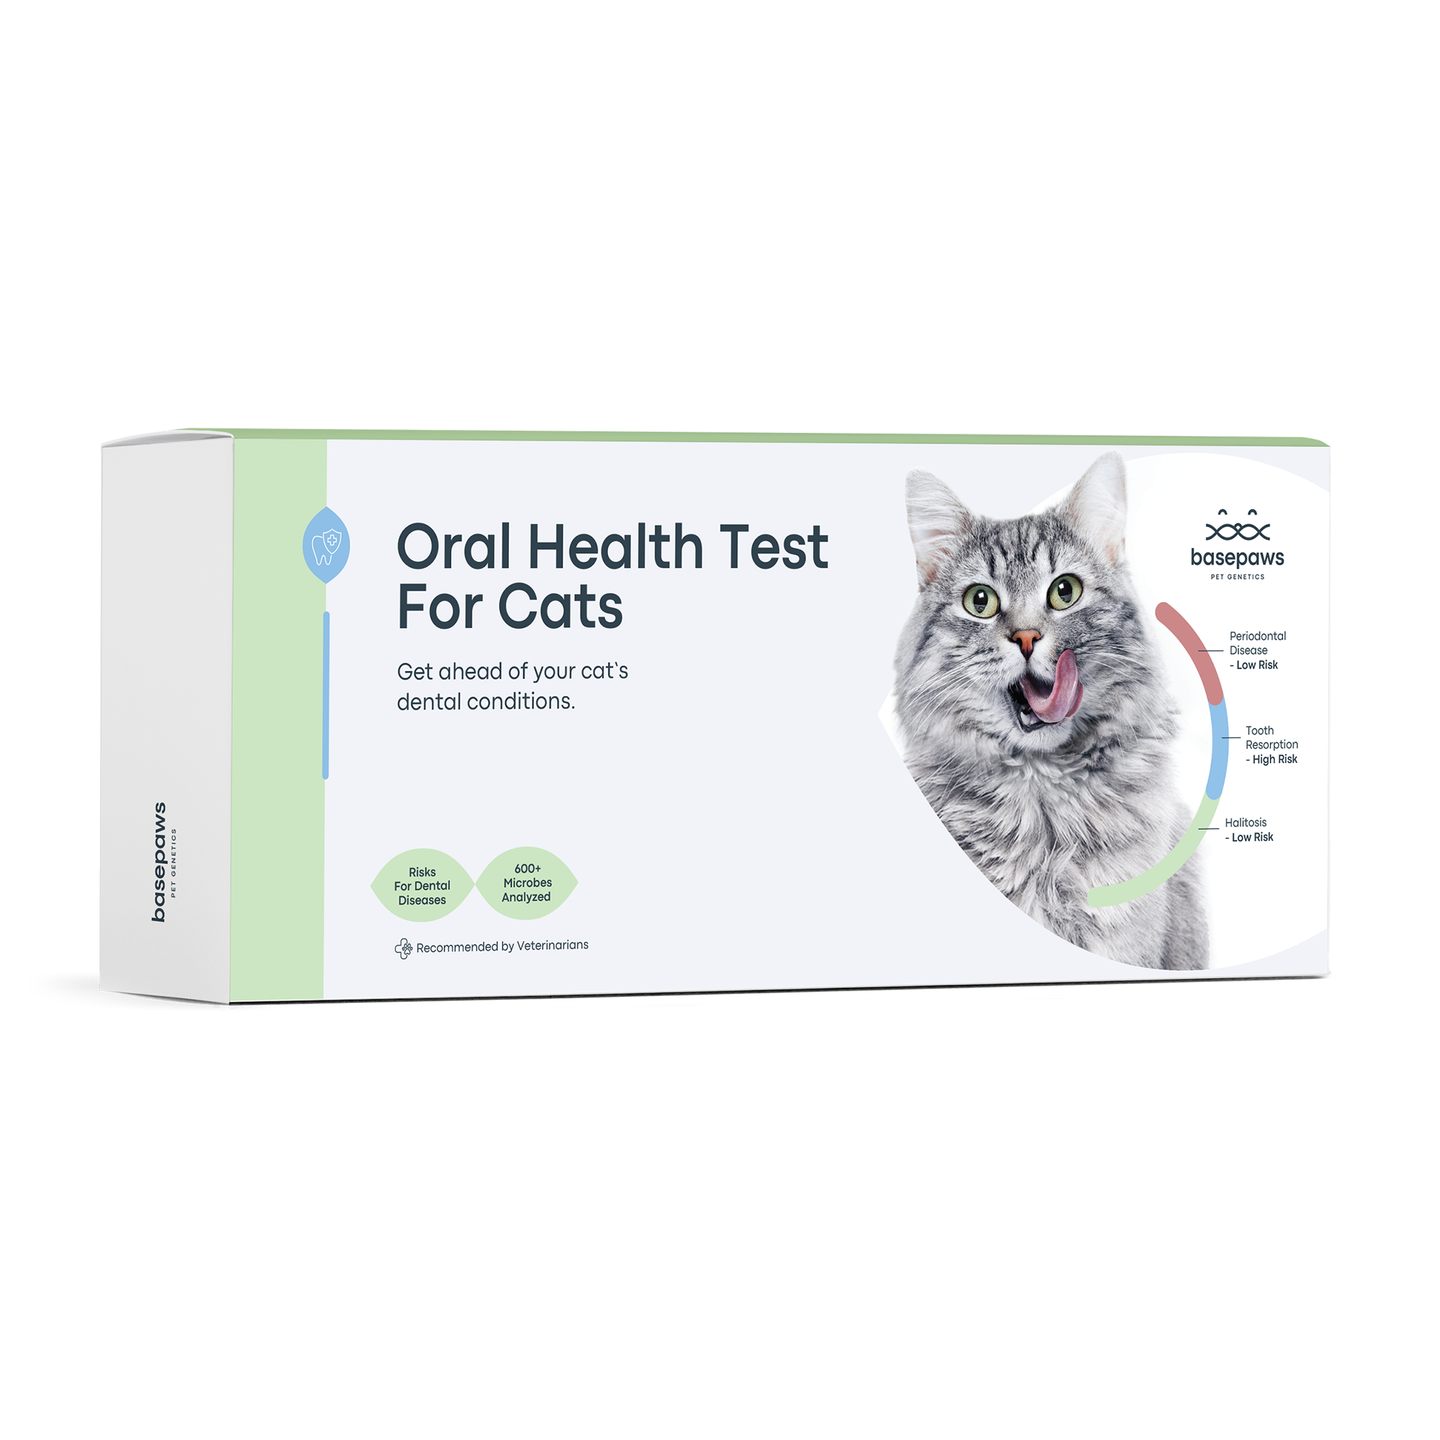 Oral Health Test for Cats